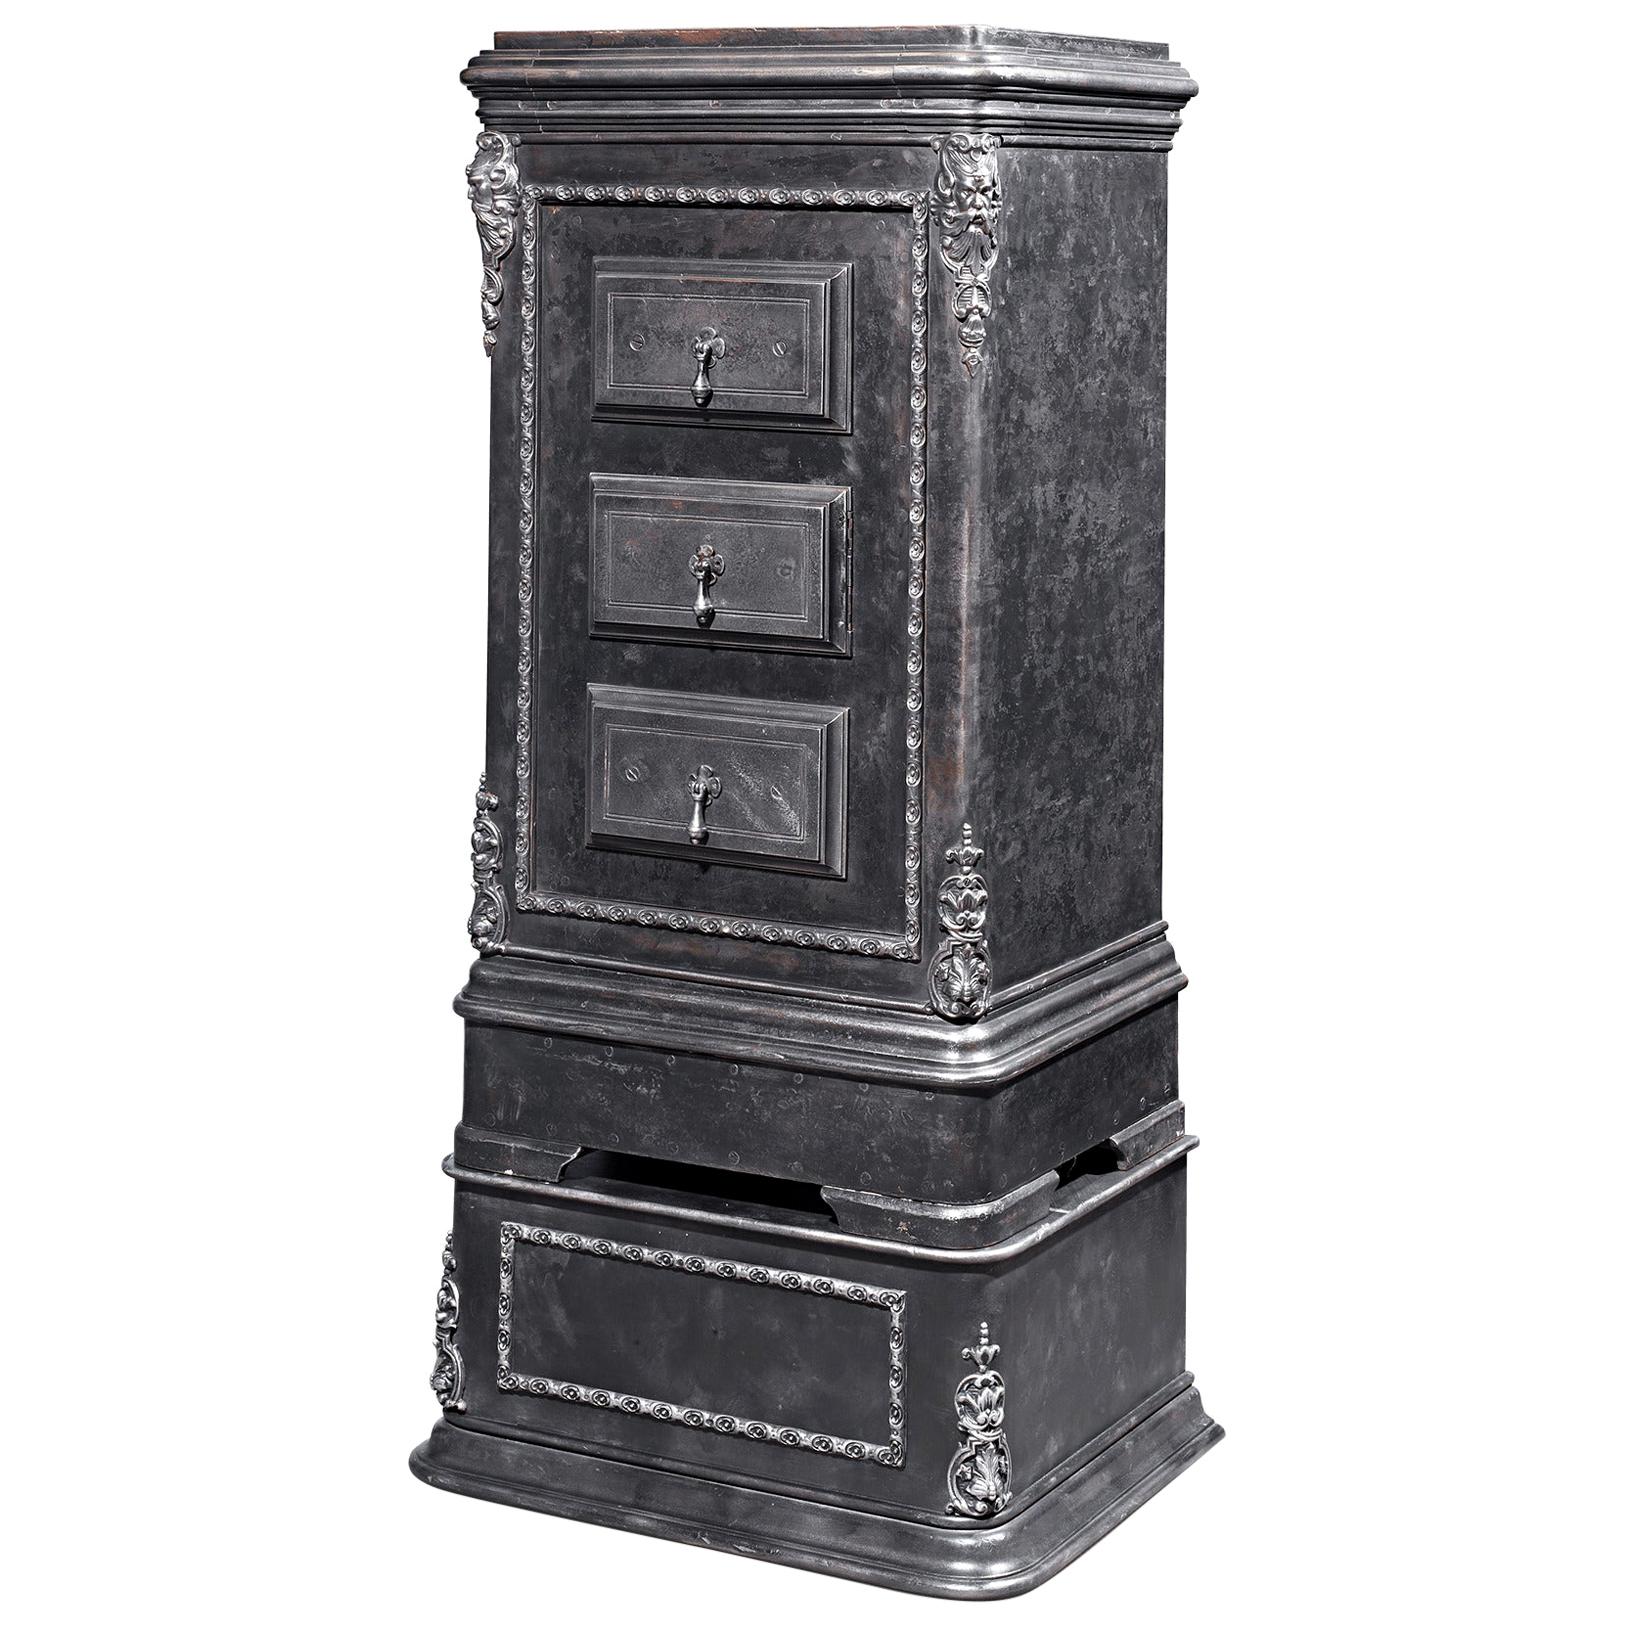 Belgian Iron Combination Safe by L. Duvilers